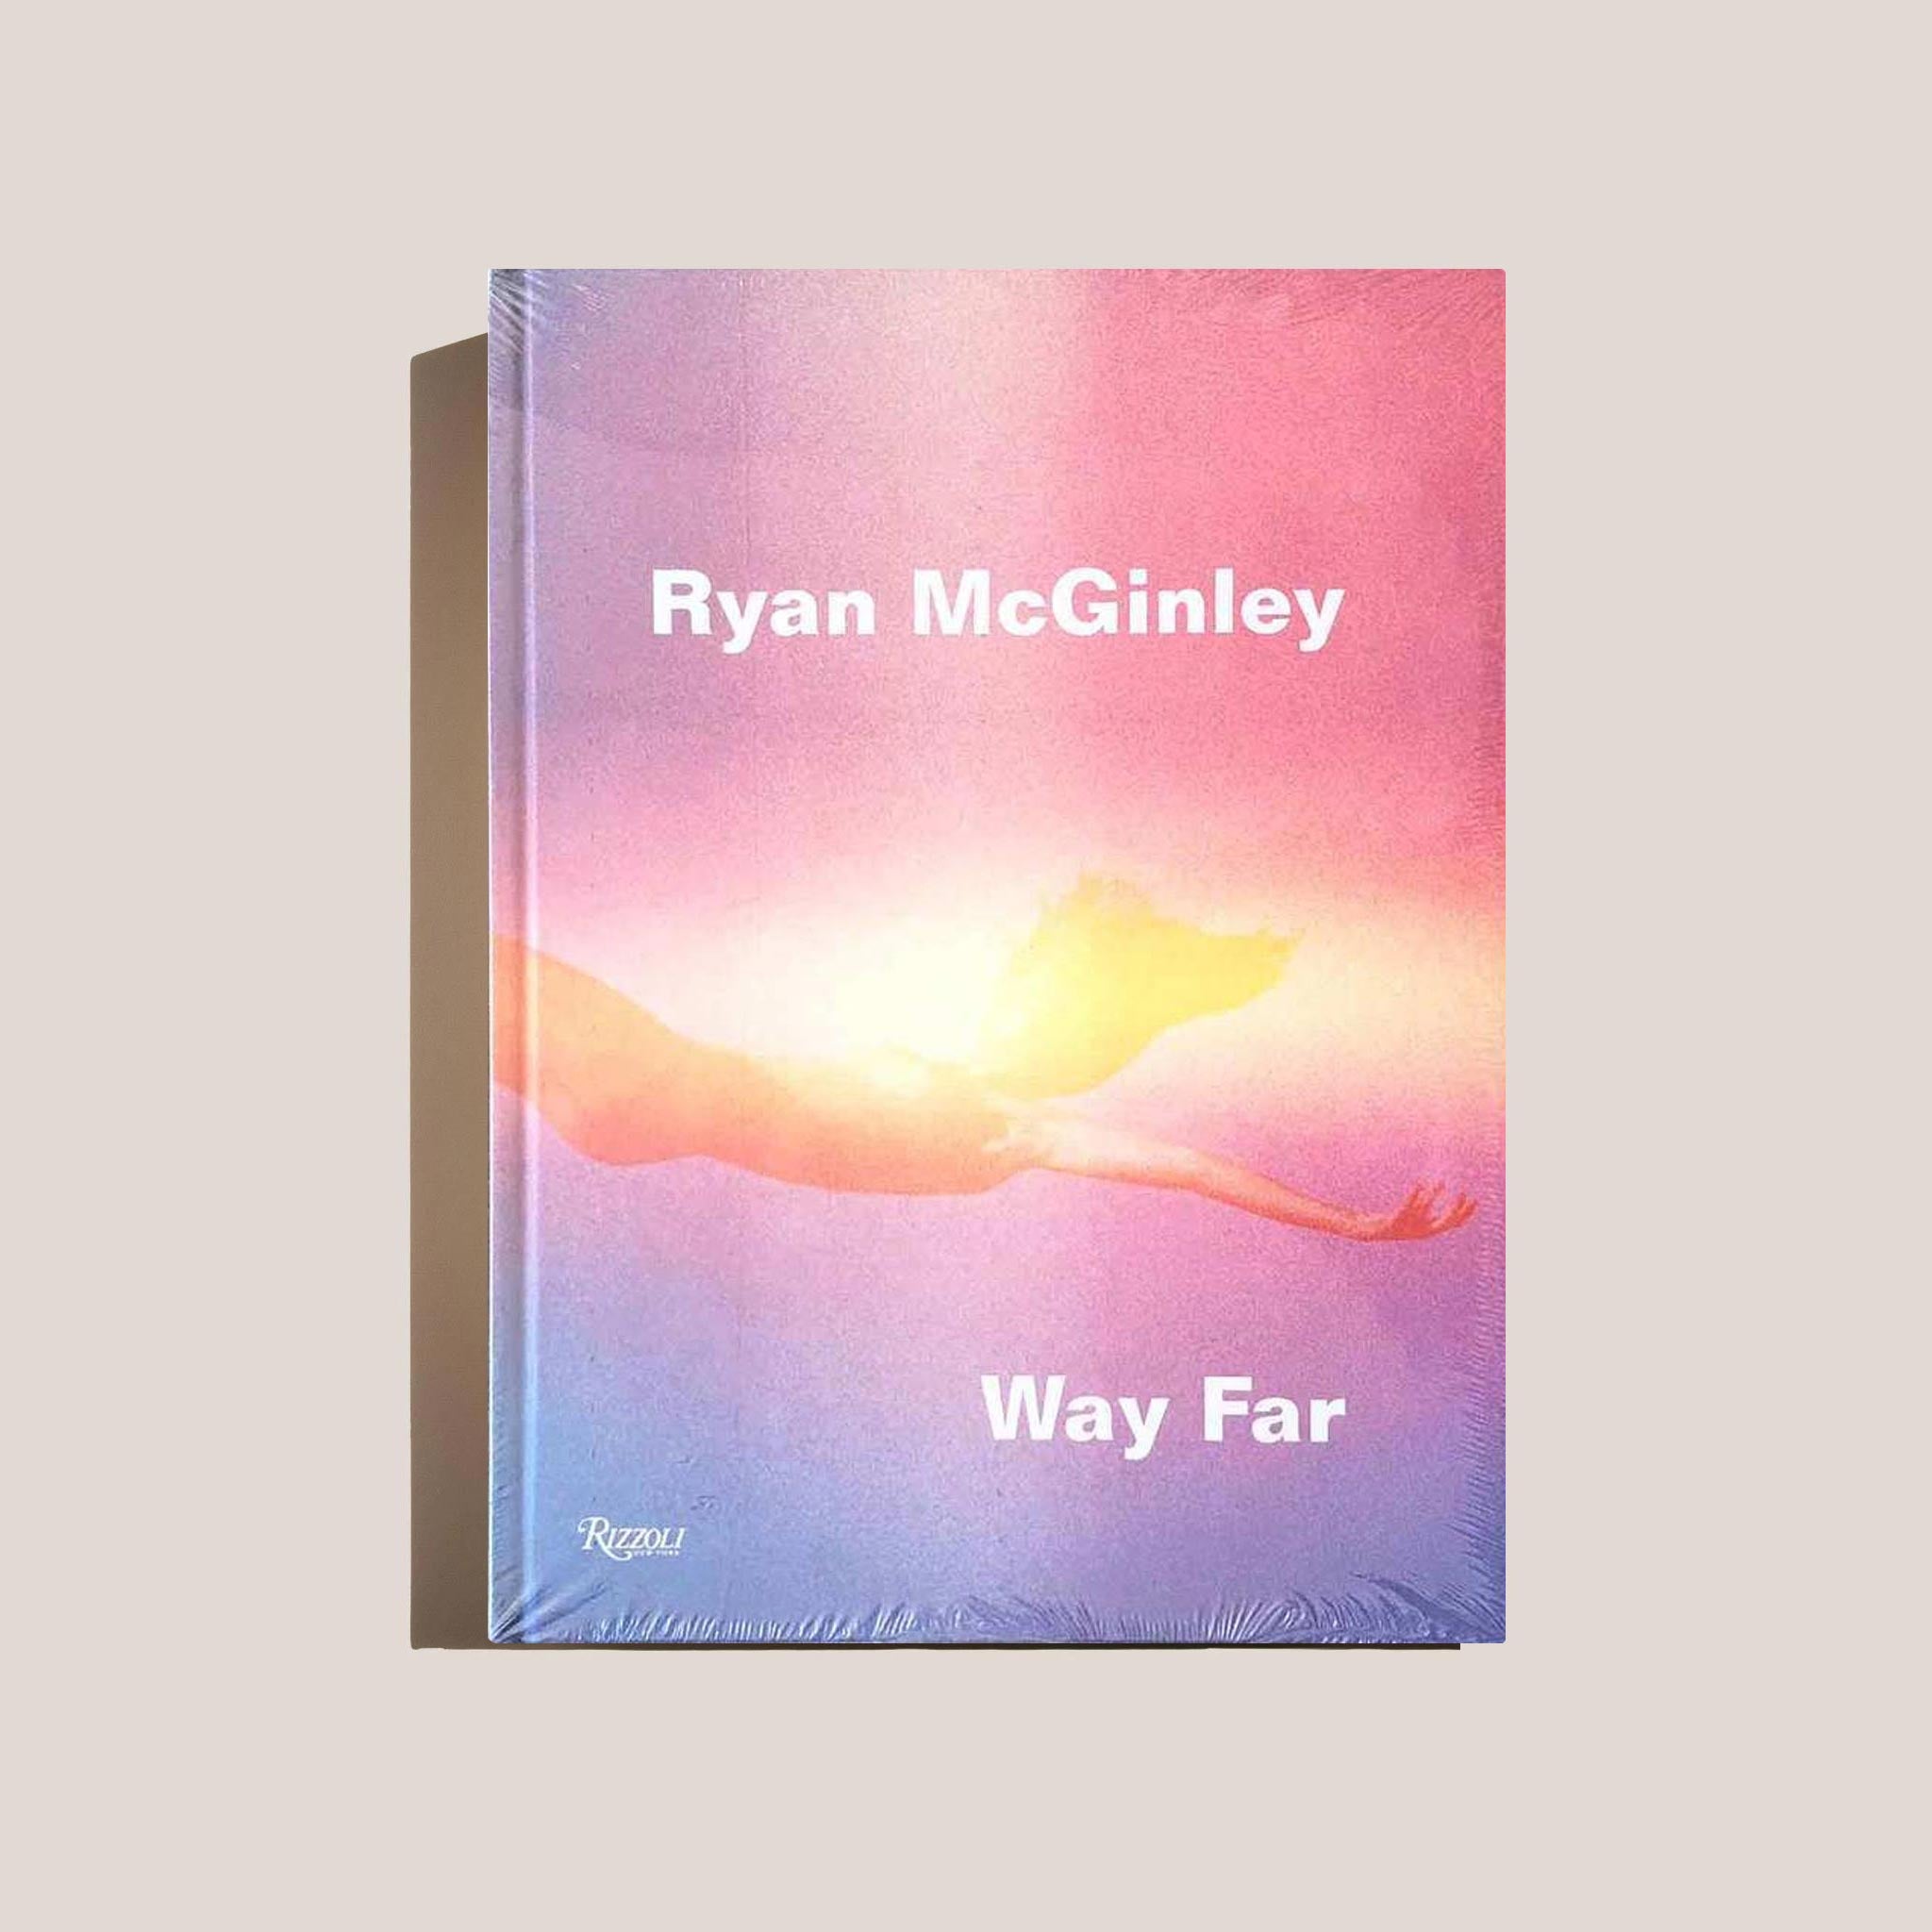 Way Far by Ryan McGinley, available at LCD.